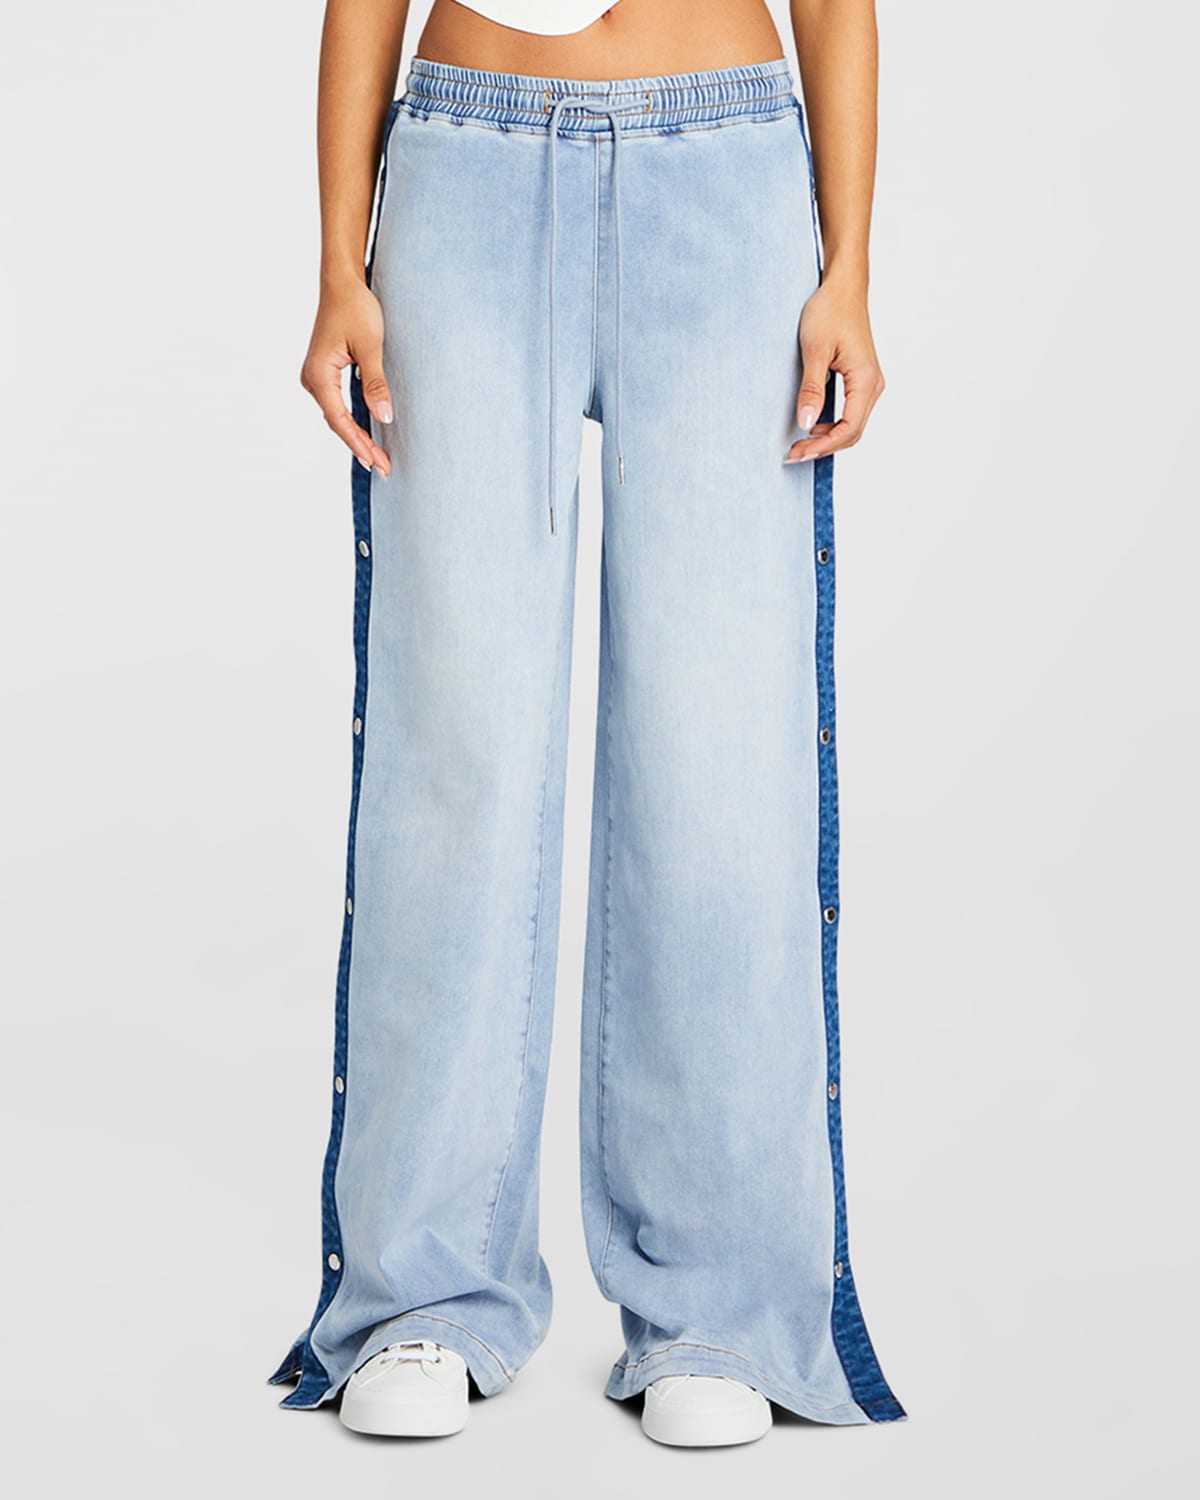 Chelle Low-Rise Baggy Jeans